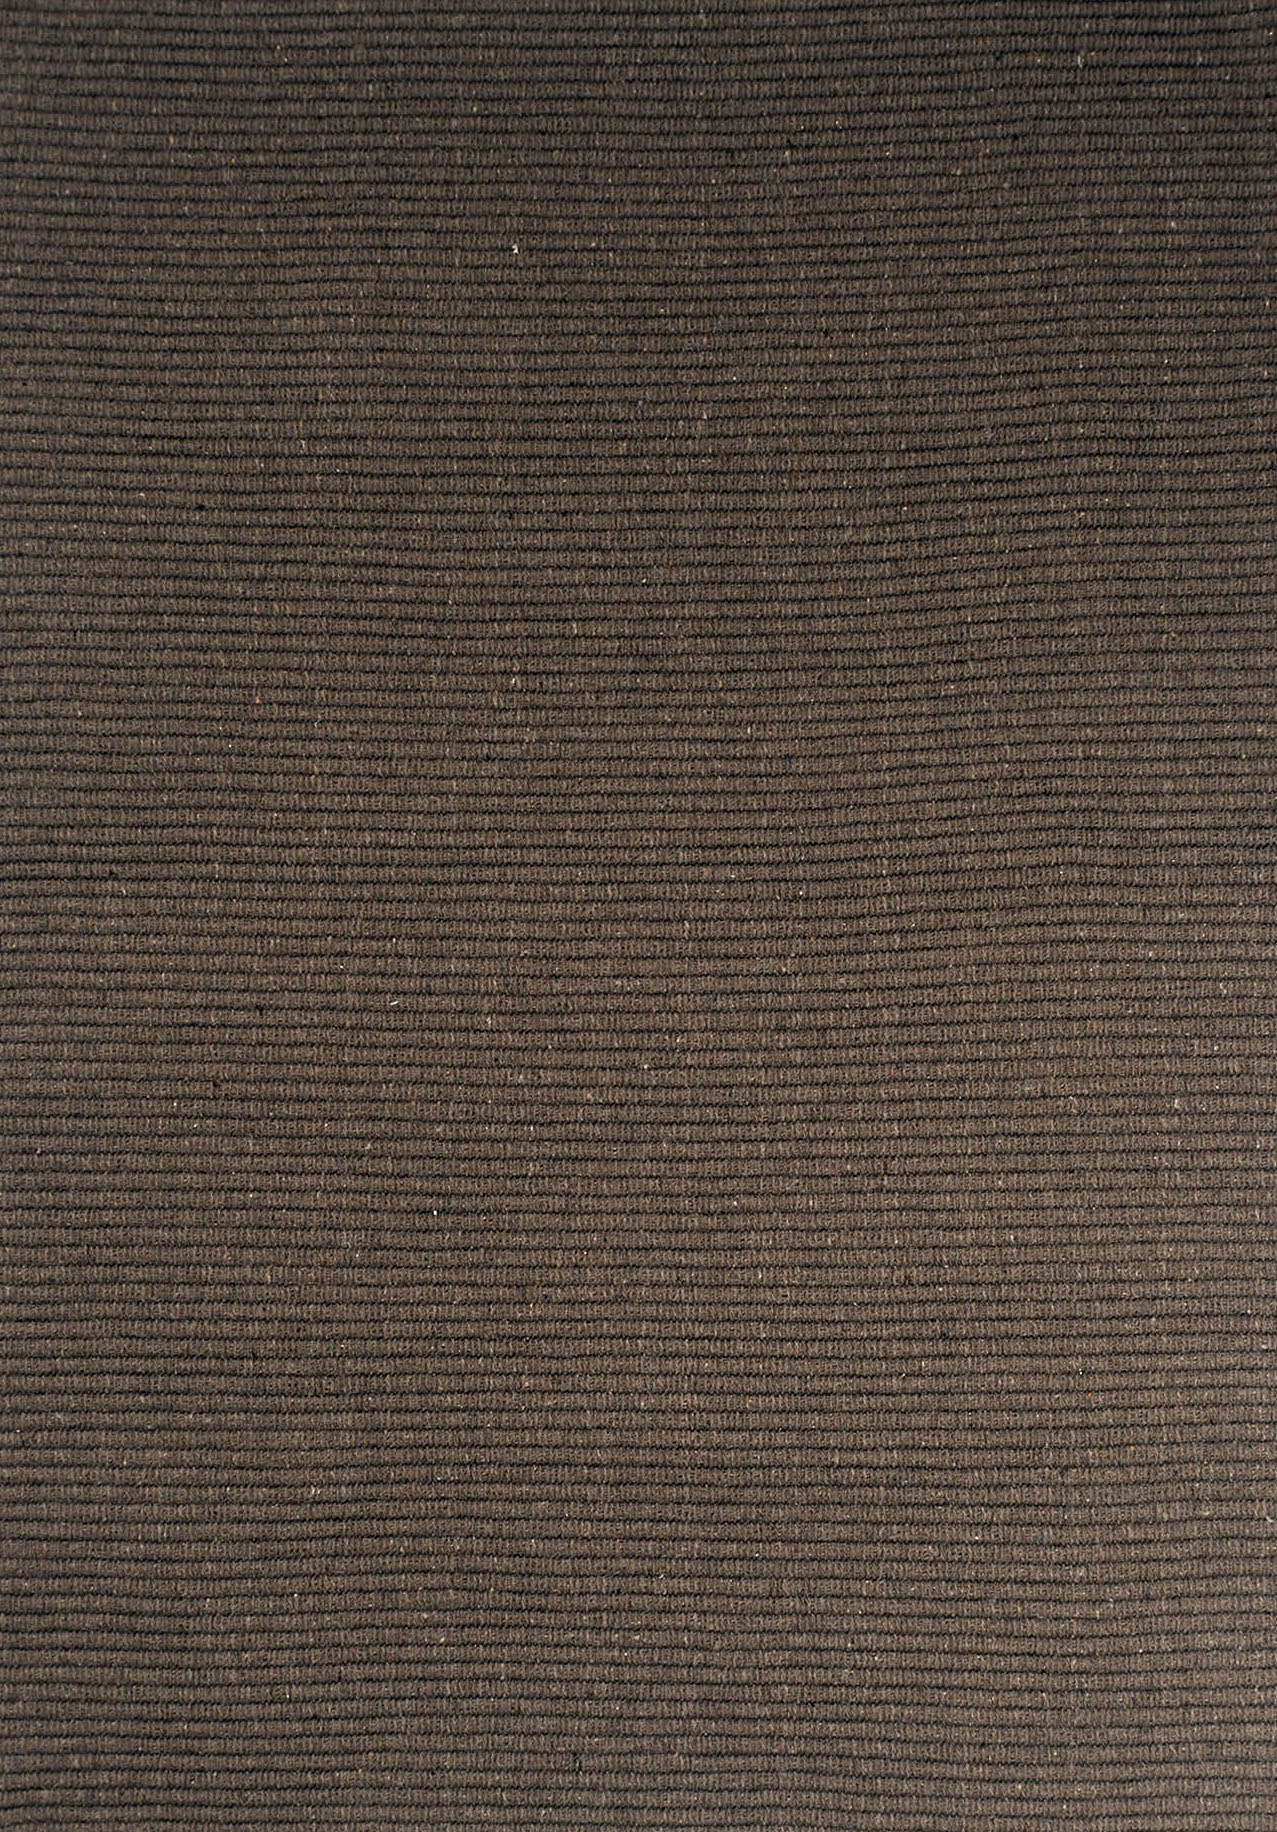 Thick Woven Wool Rug - Solid Taupe - Hook & Loom